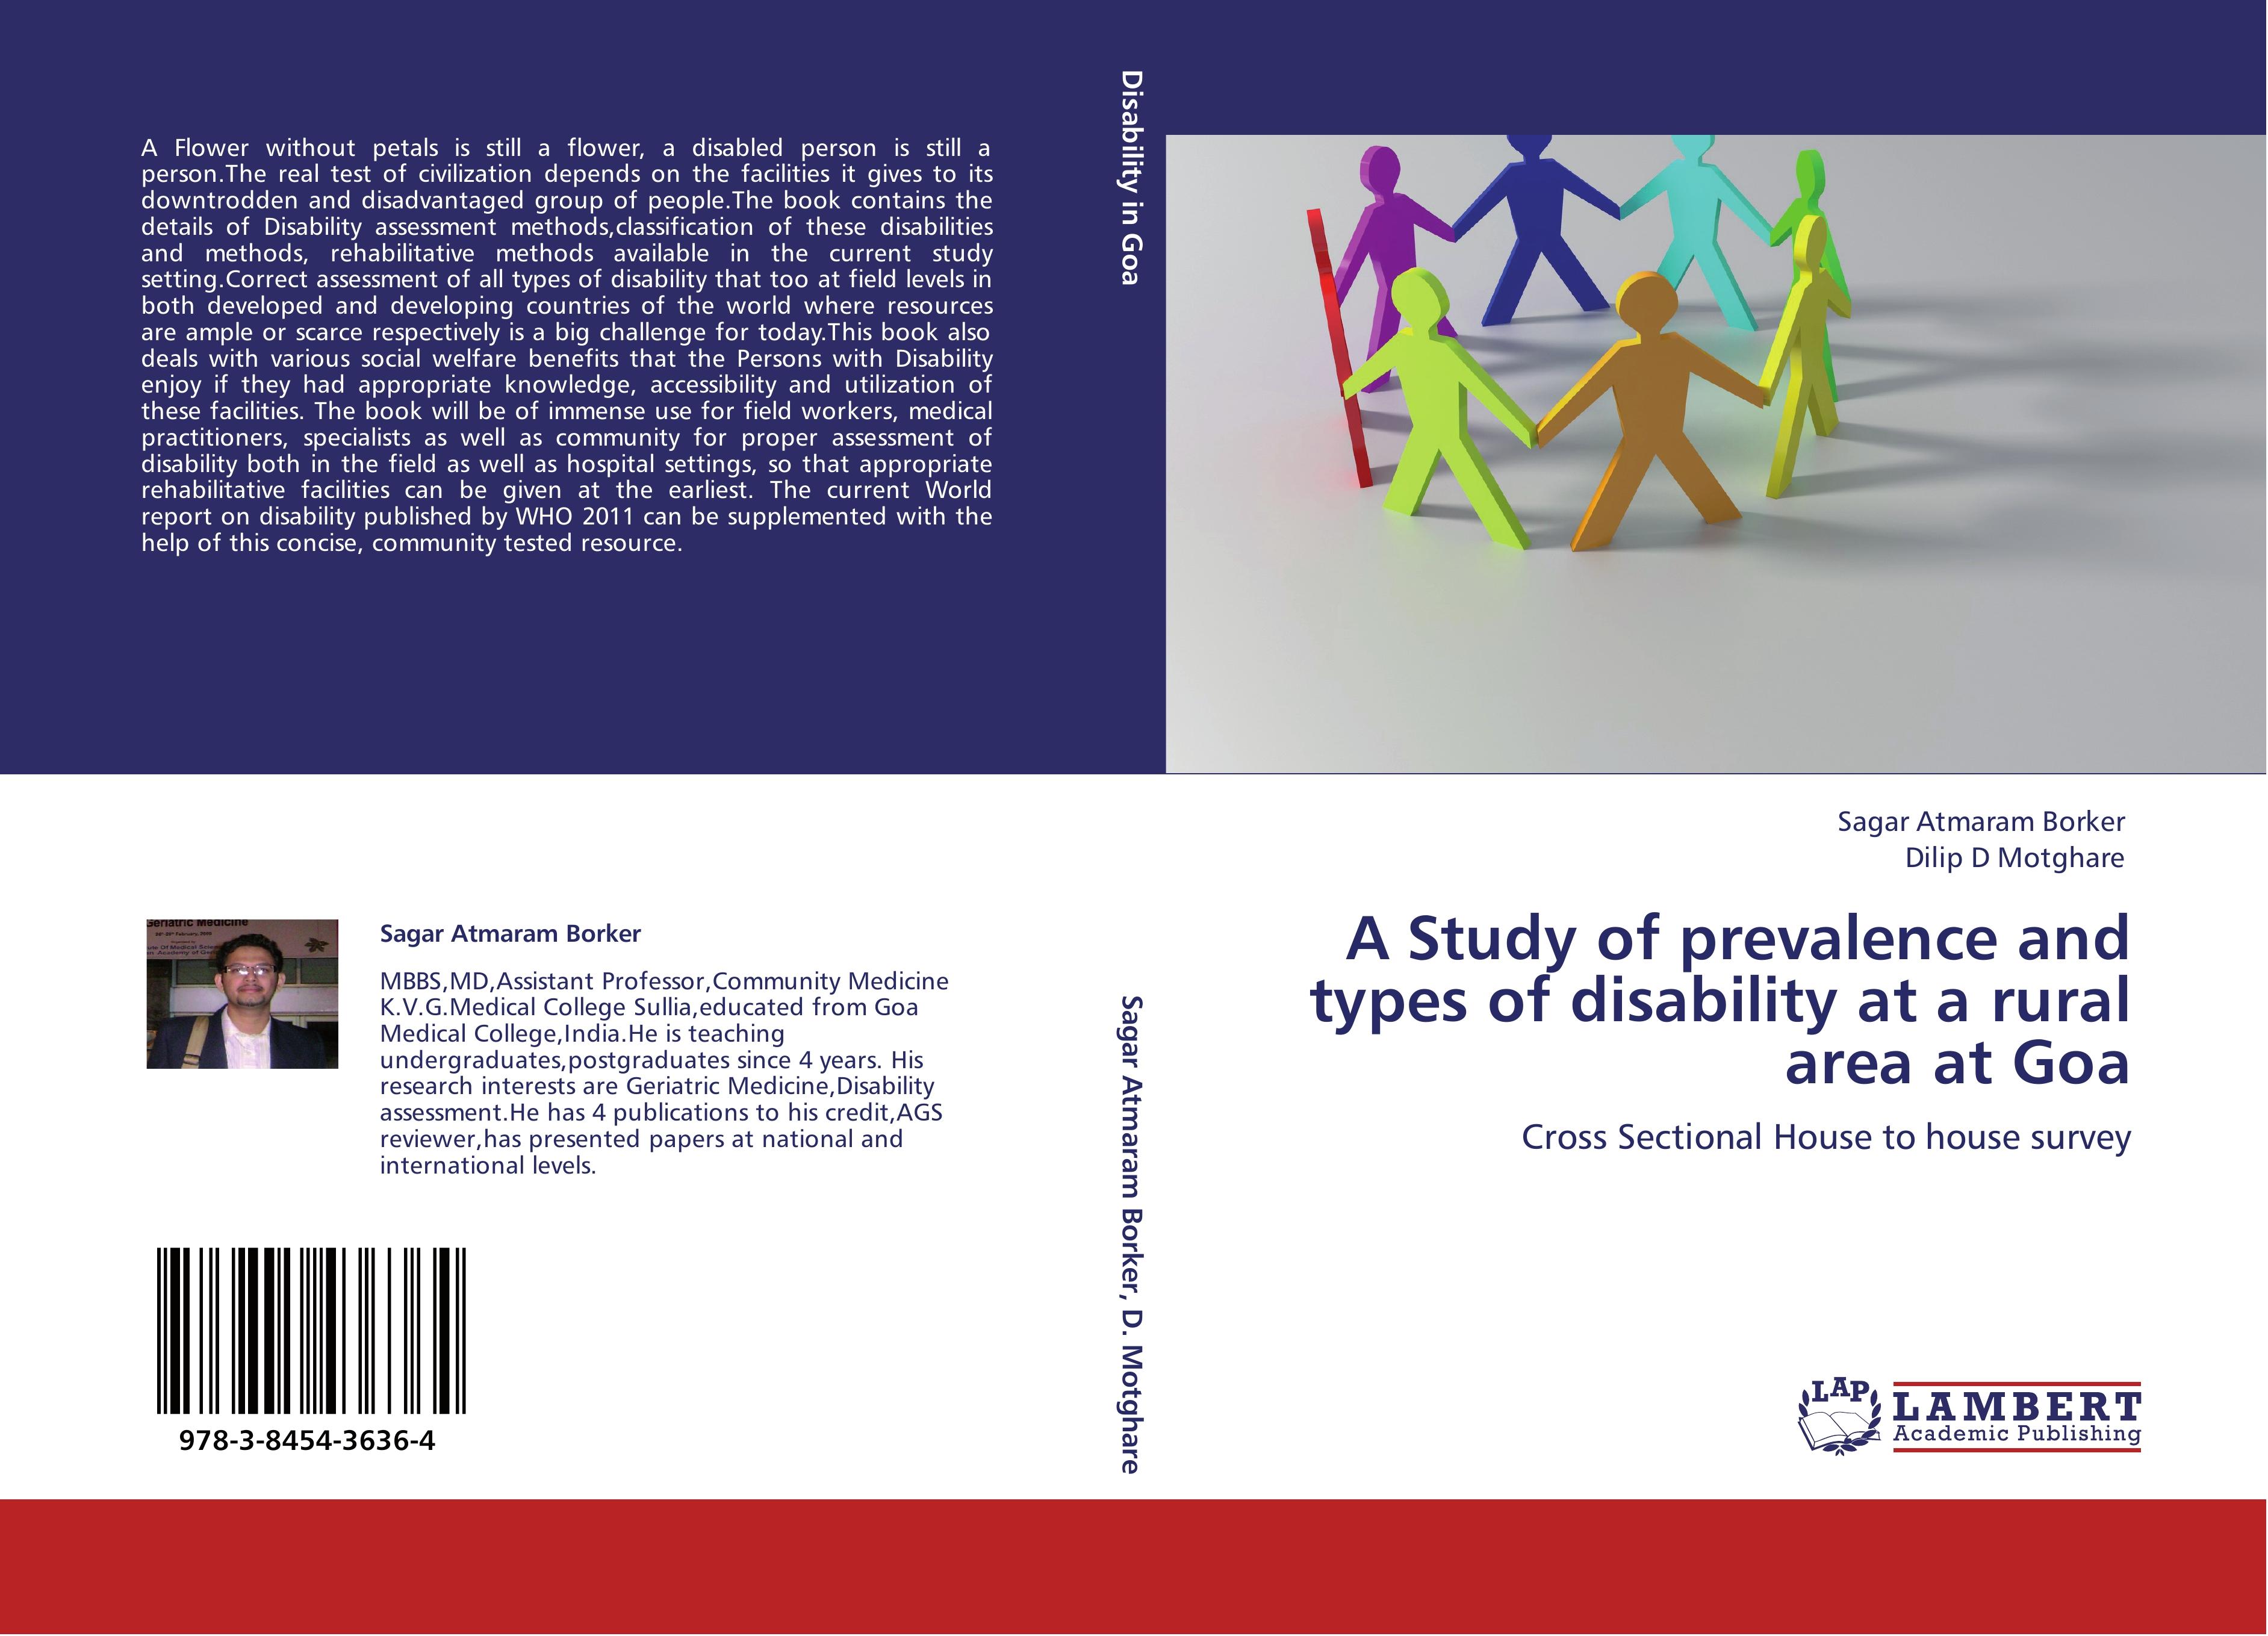 A Study of prevalence and types of disability at a rural area at Goa - Sagar Atmaram Borker Dilip D Motghare